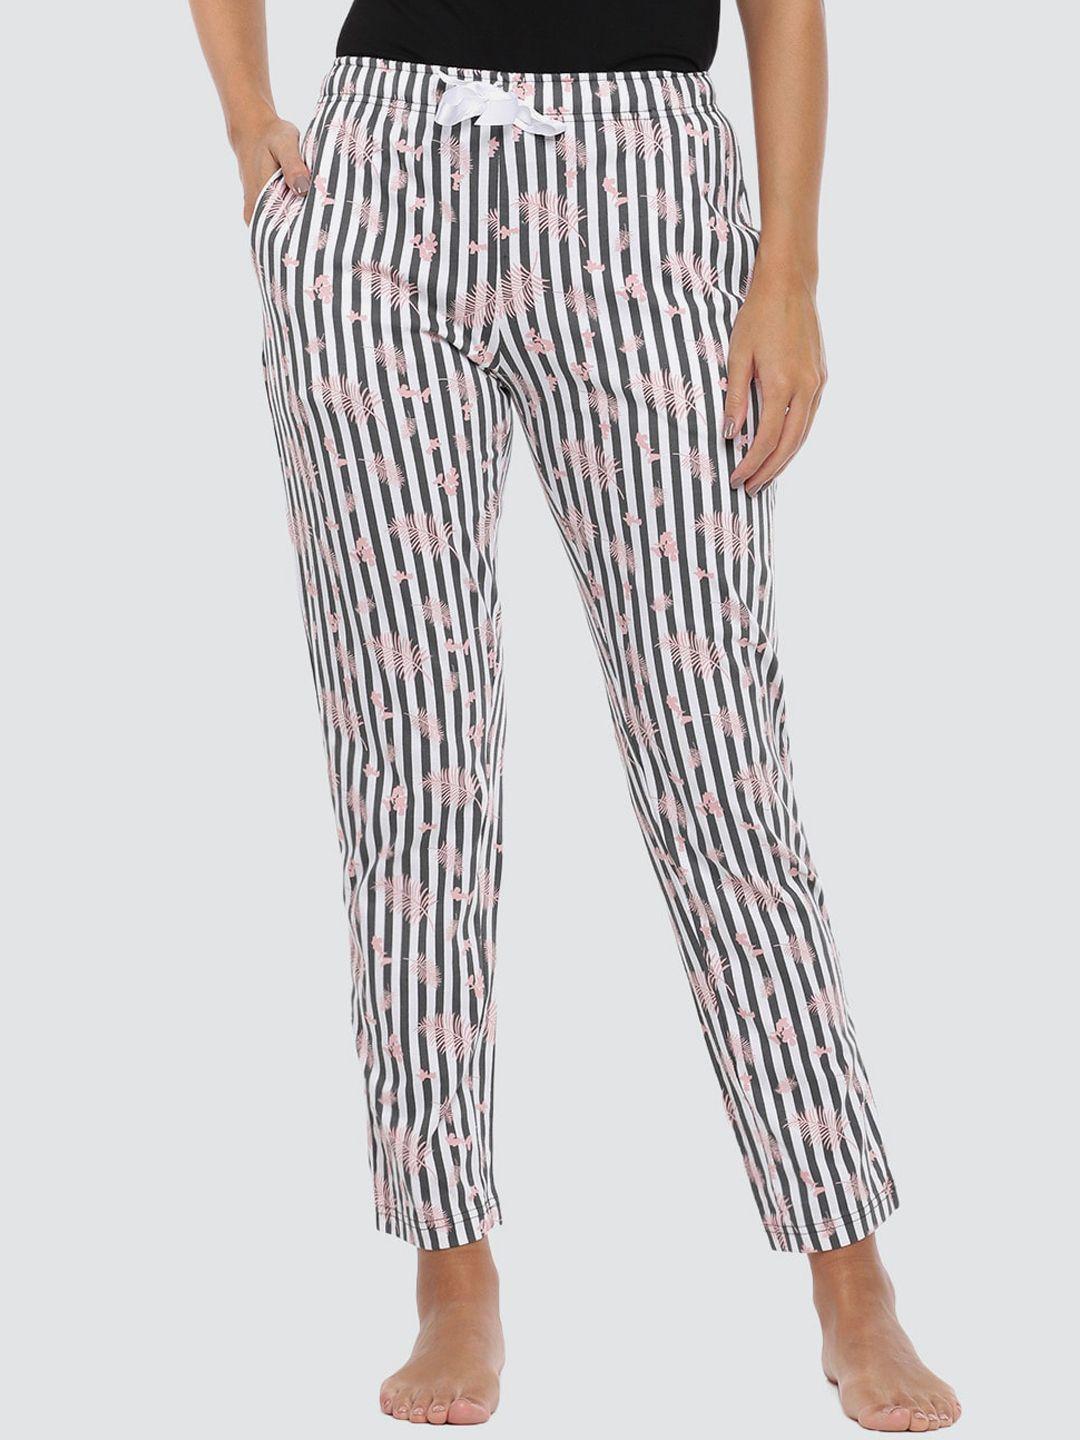 dollar missy women black and white pure cotton striped lounge pants